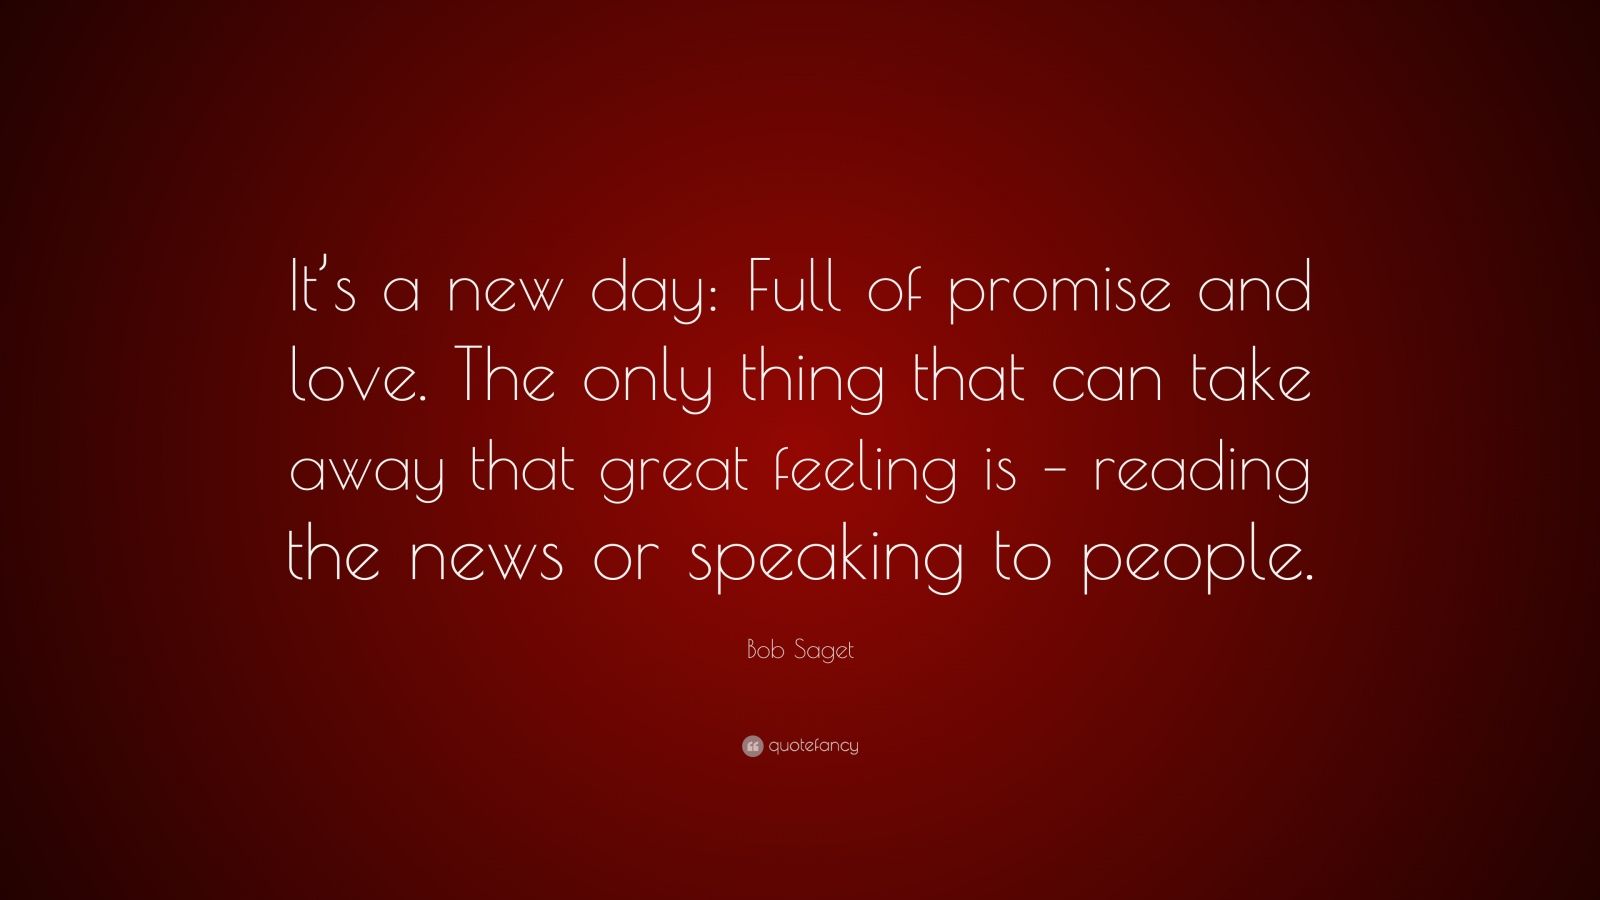 Bob Sa Quote “It s a new day Full of promise and love